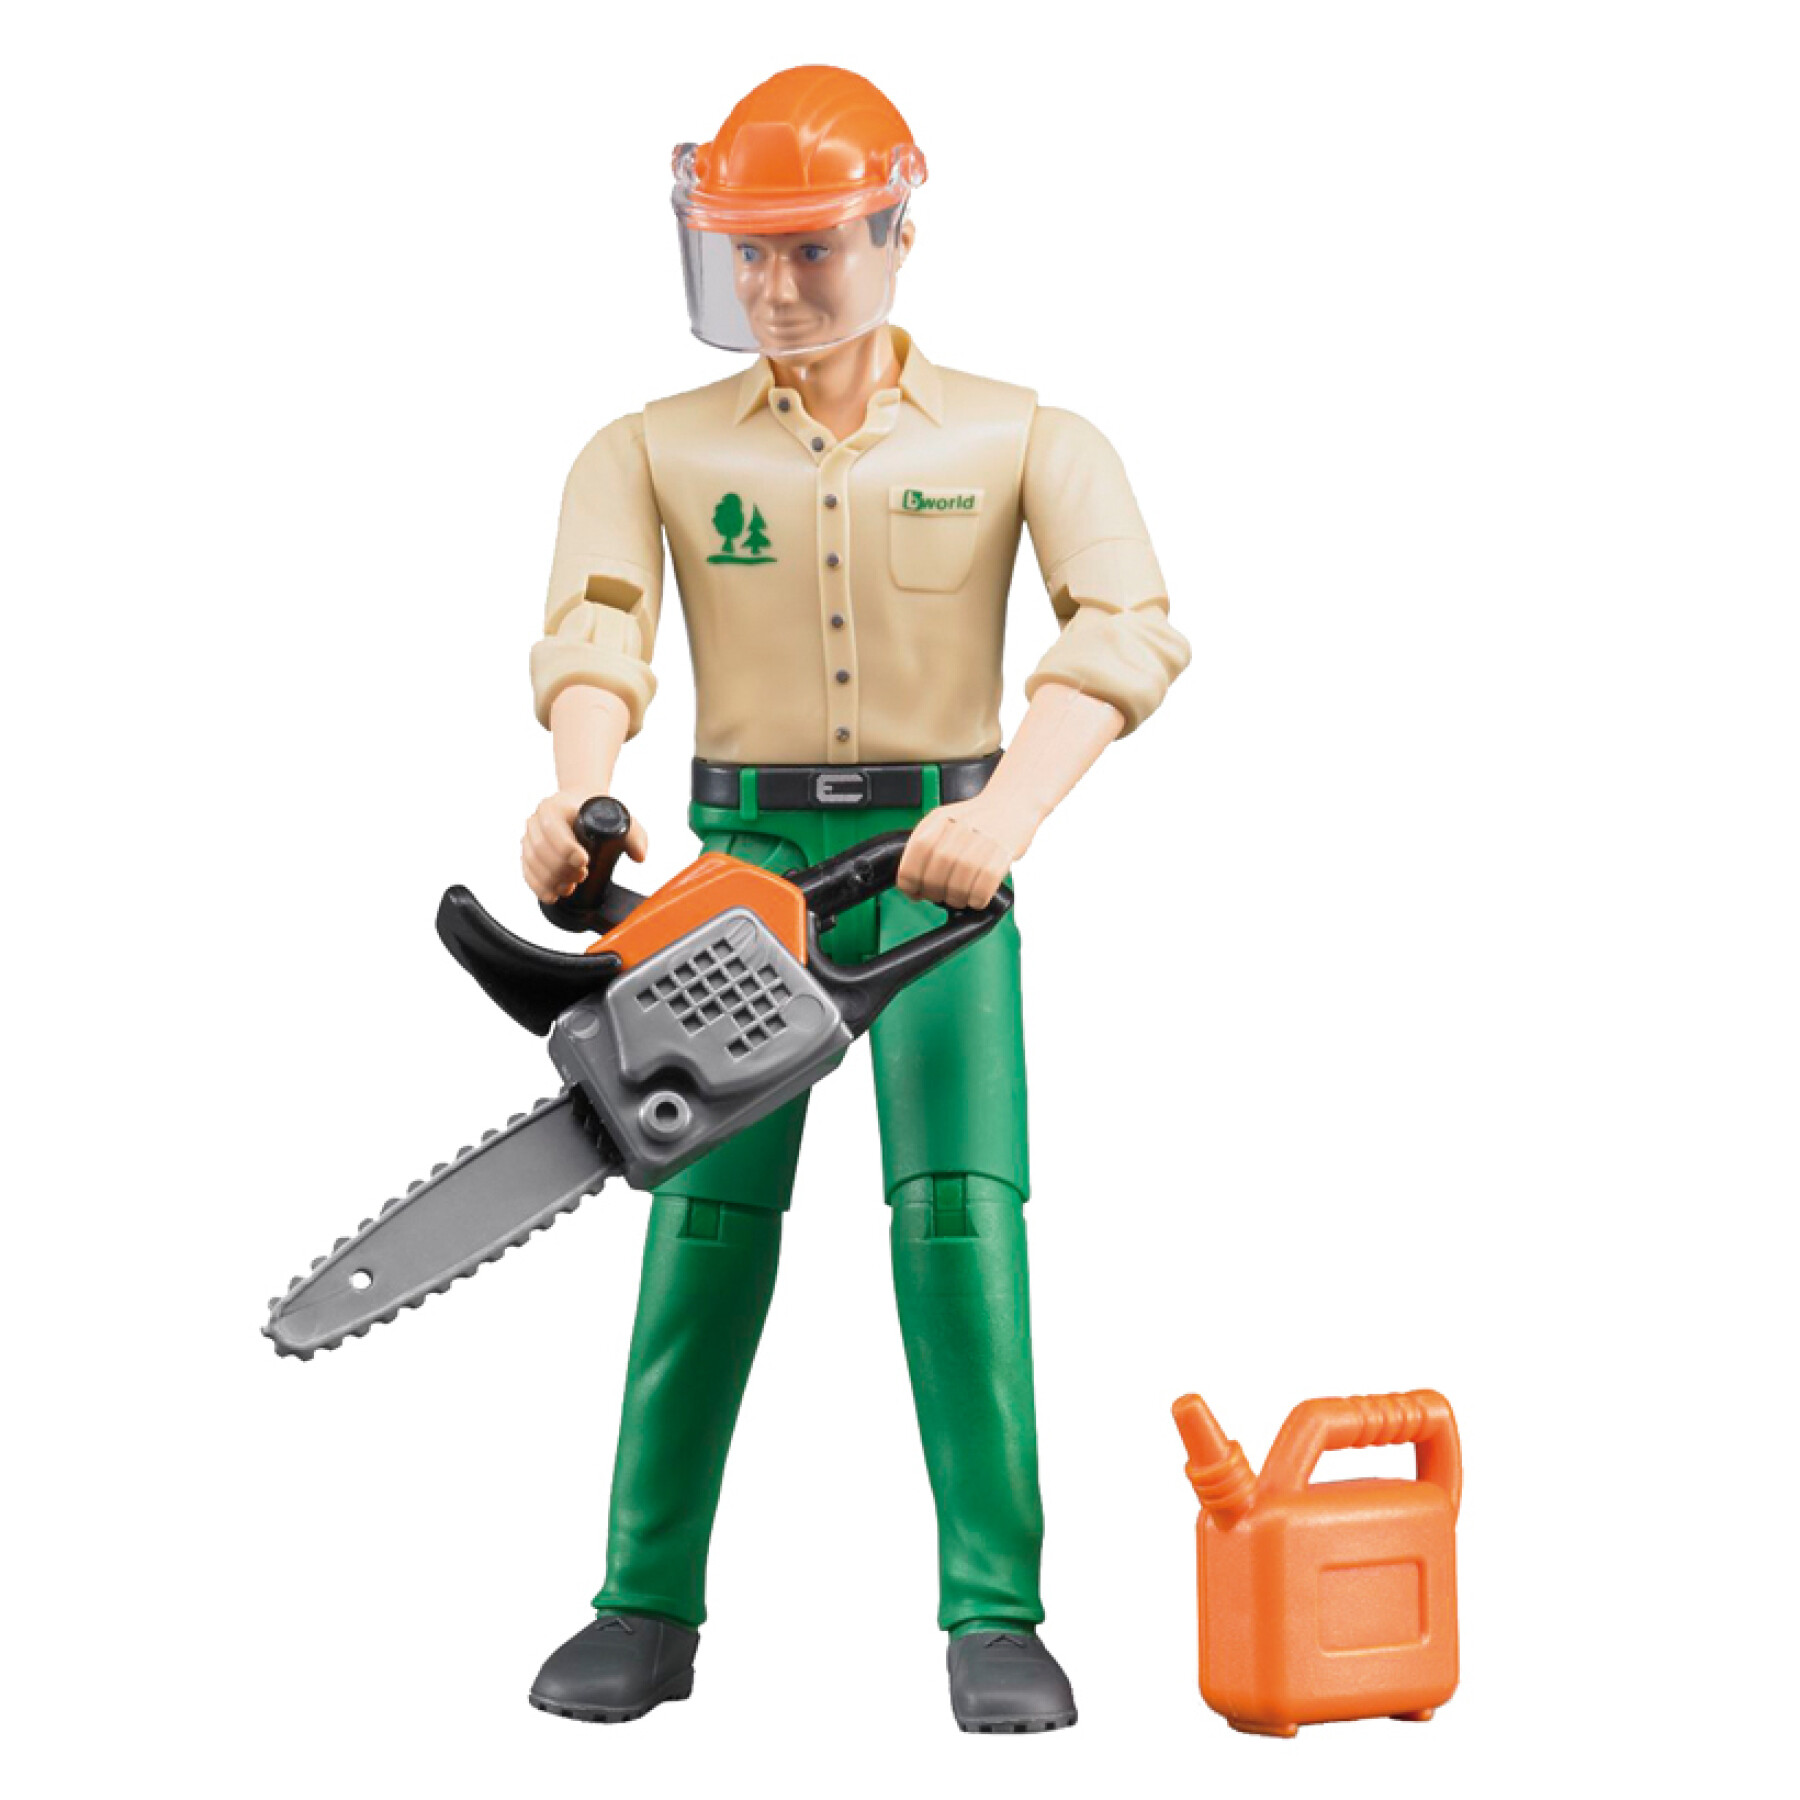 Forestry figurine with accessories Bruder